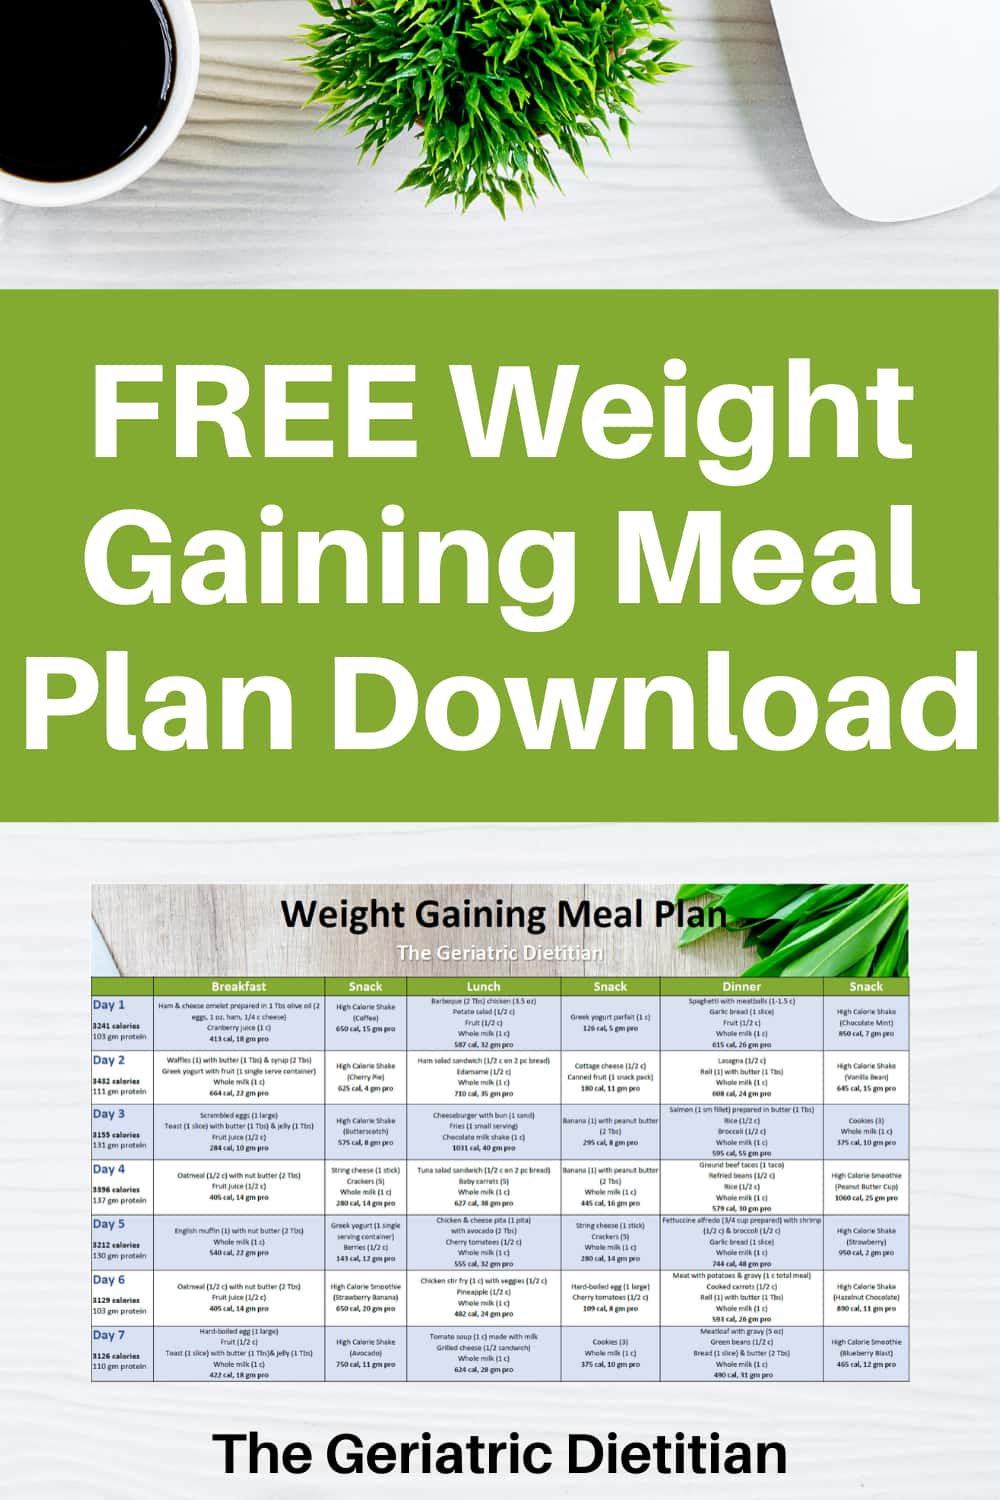 9 High Calorie Meals [FREE Meal Plan] - The Geriatric Dietitian